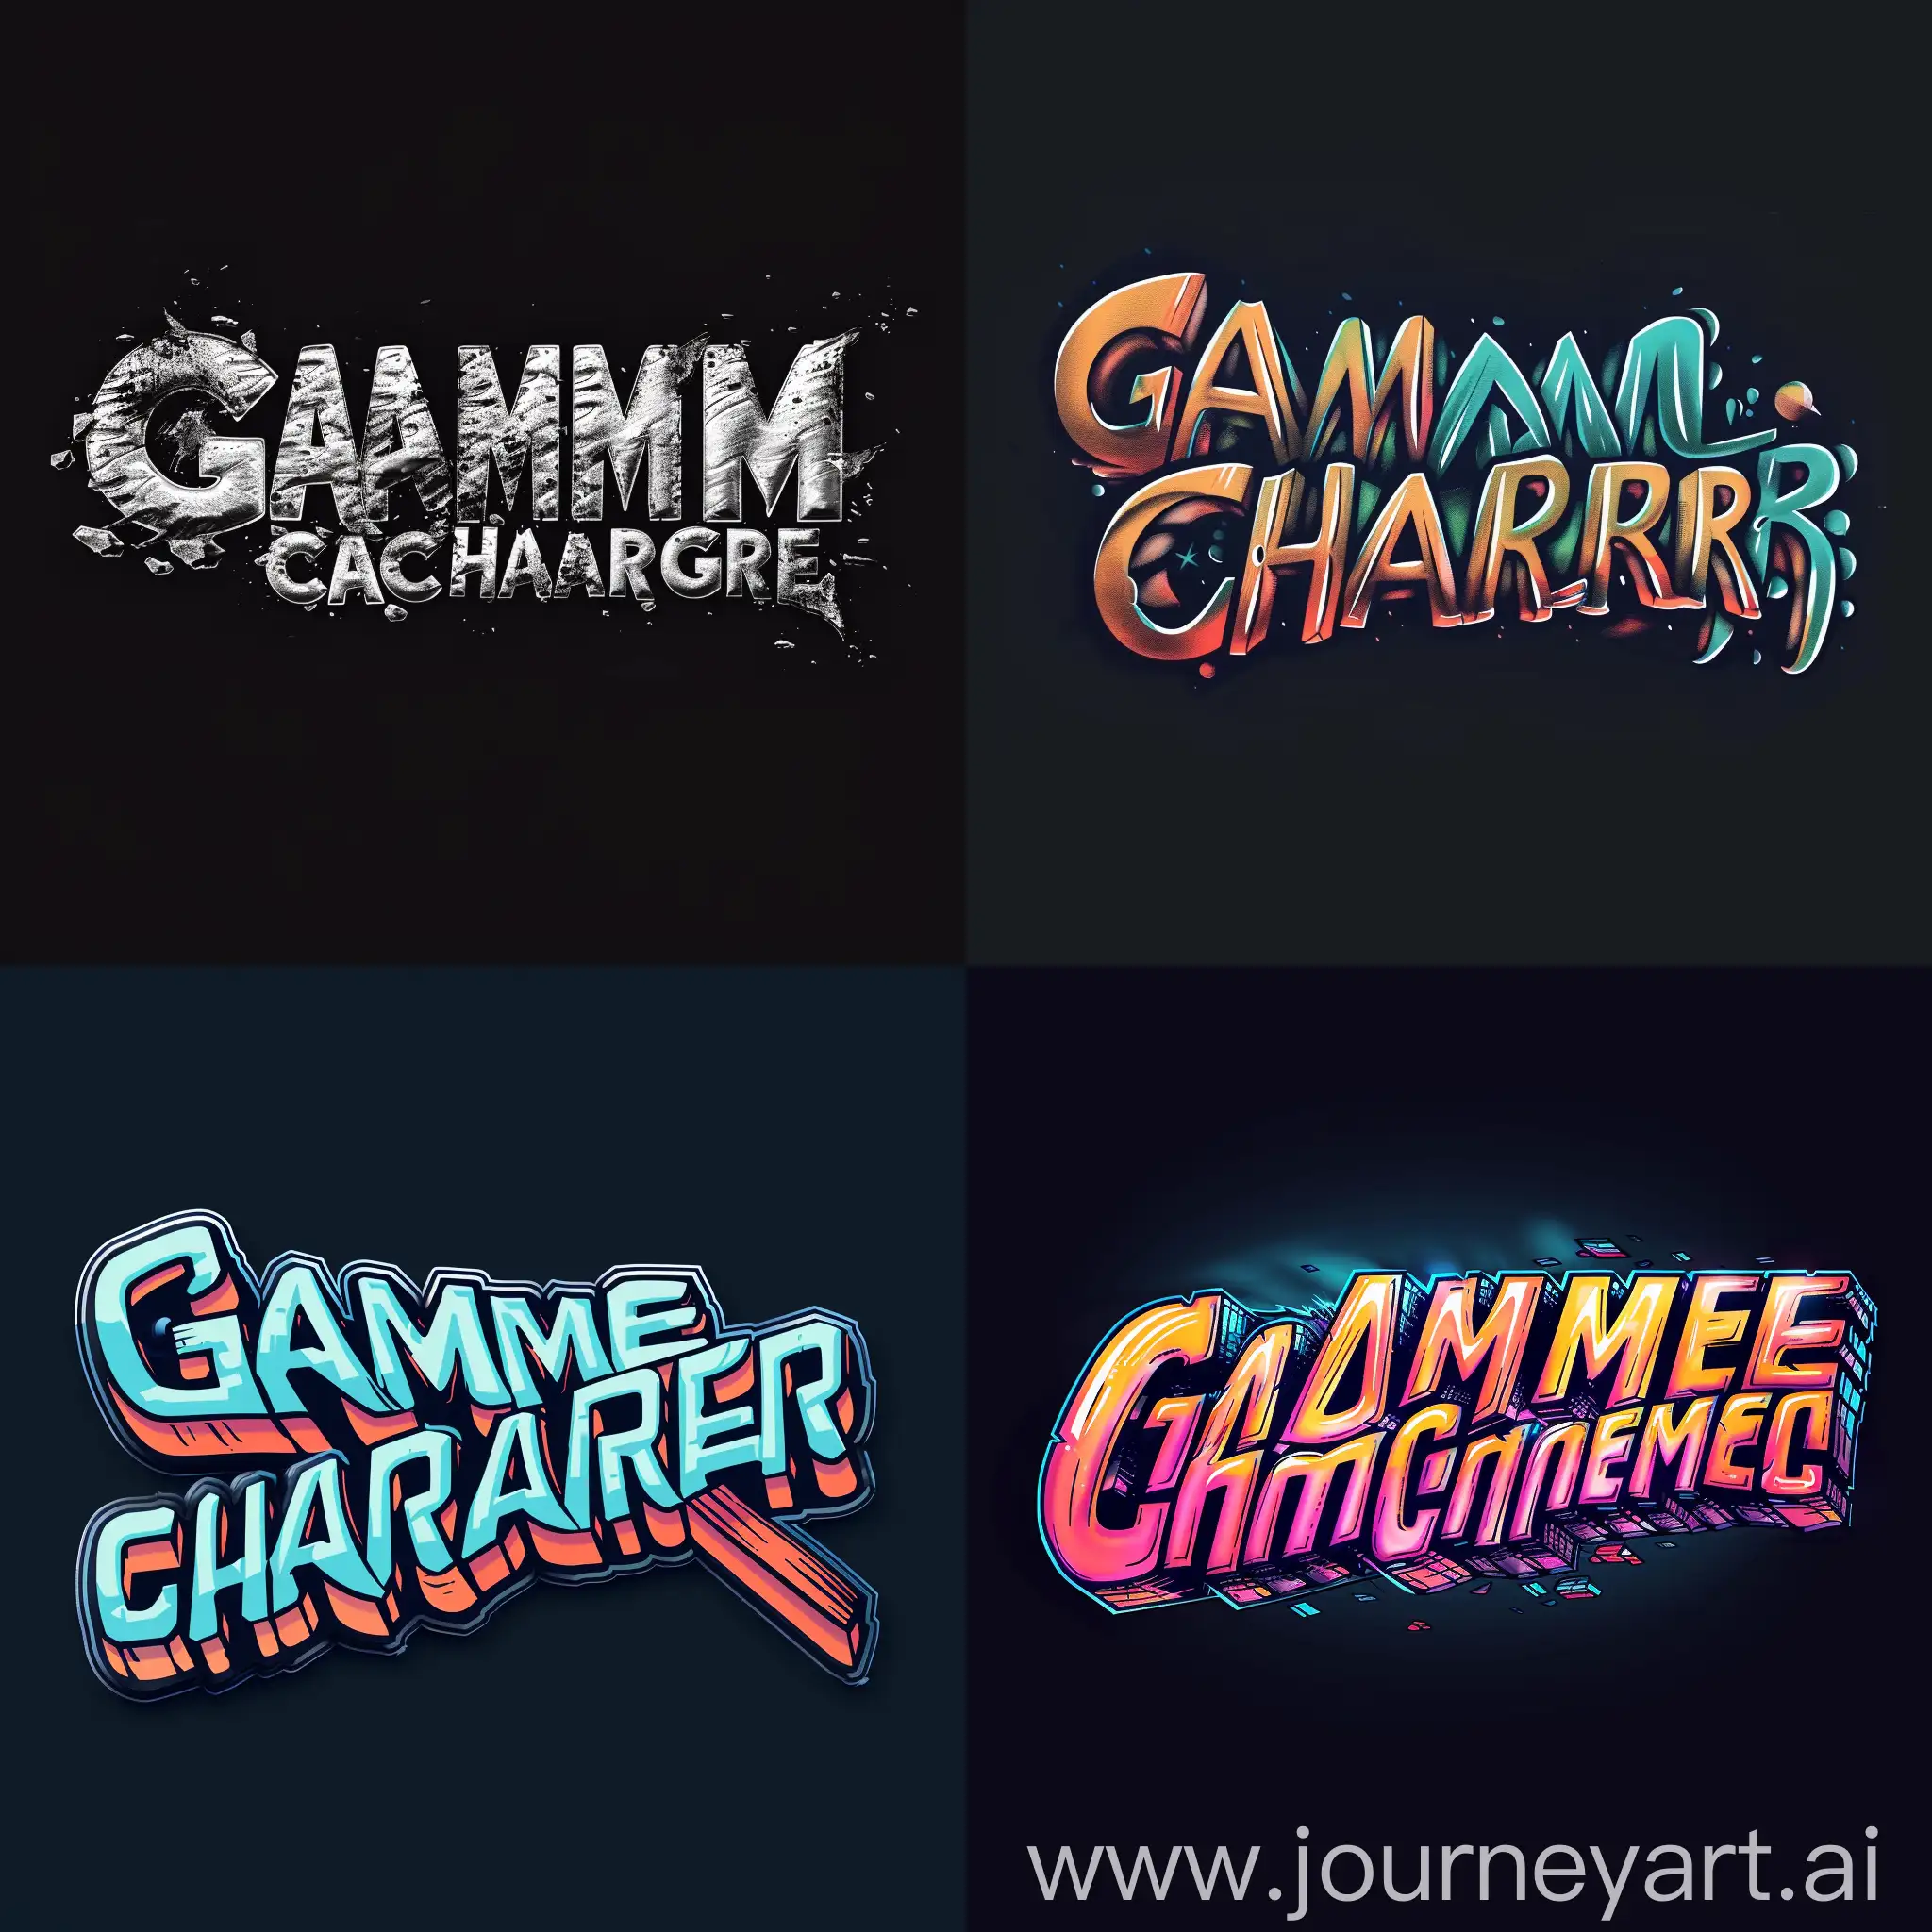 design a logo for "game changer". use the word "game changer" on it. use first letters of that too.